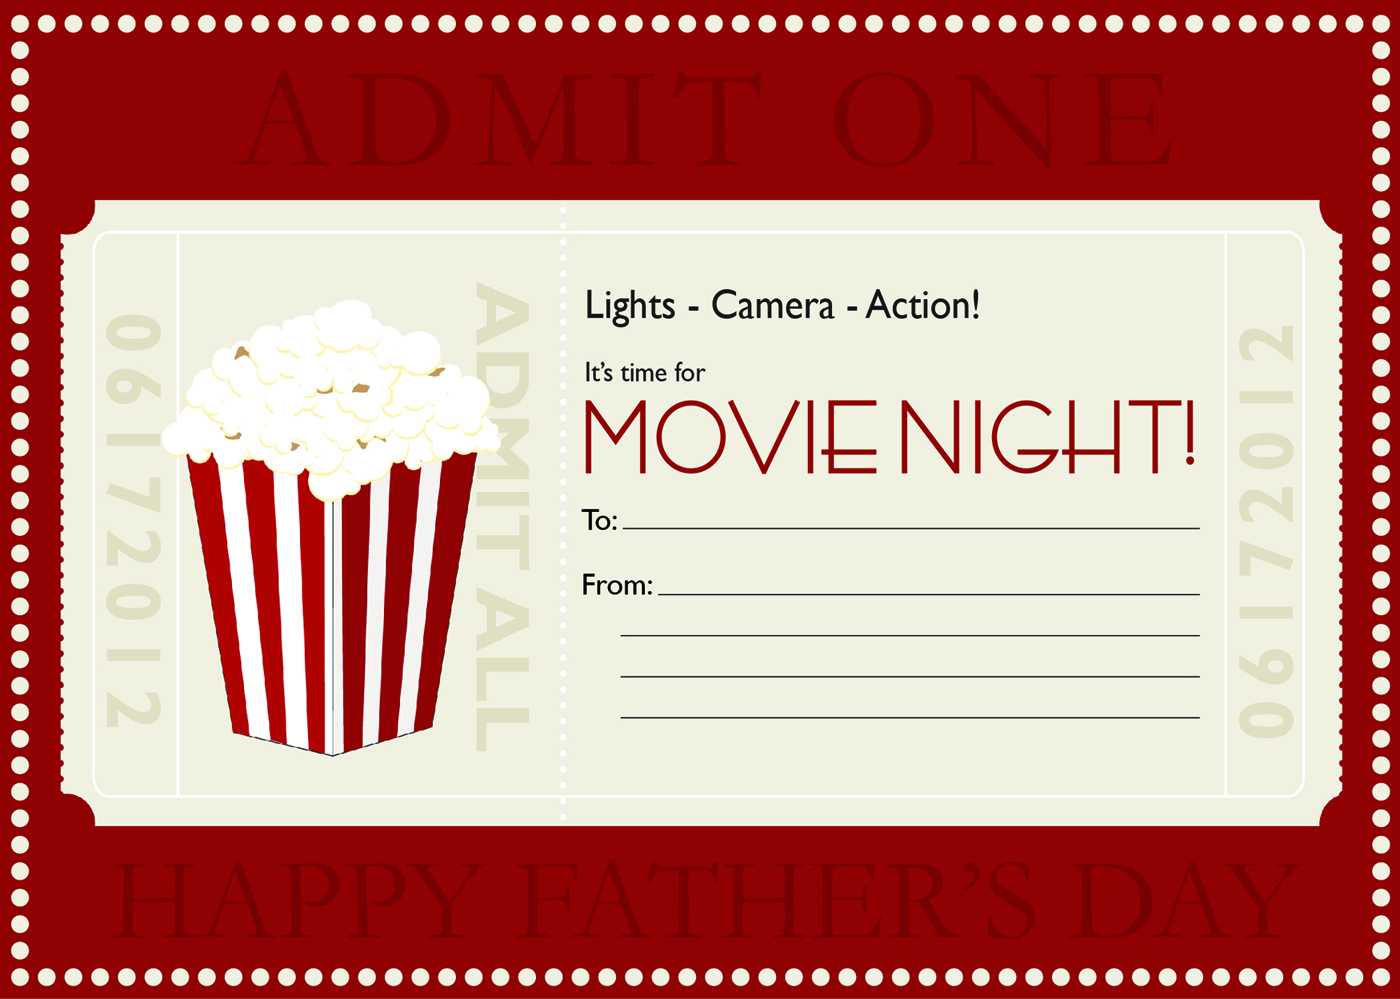 Movie Gift Certificate Templates | Gift Certificate Templates For Movie Gift Certificate Template